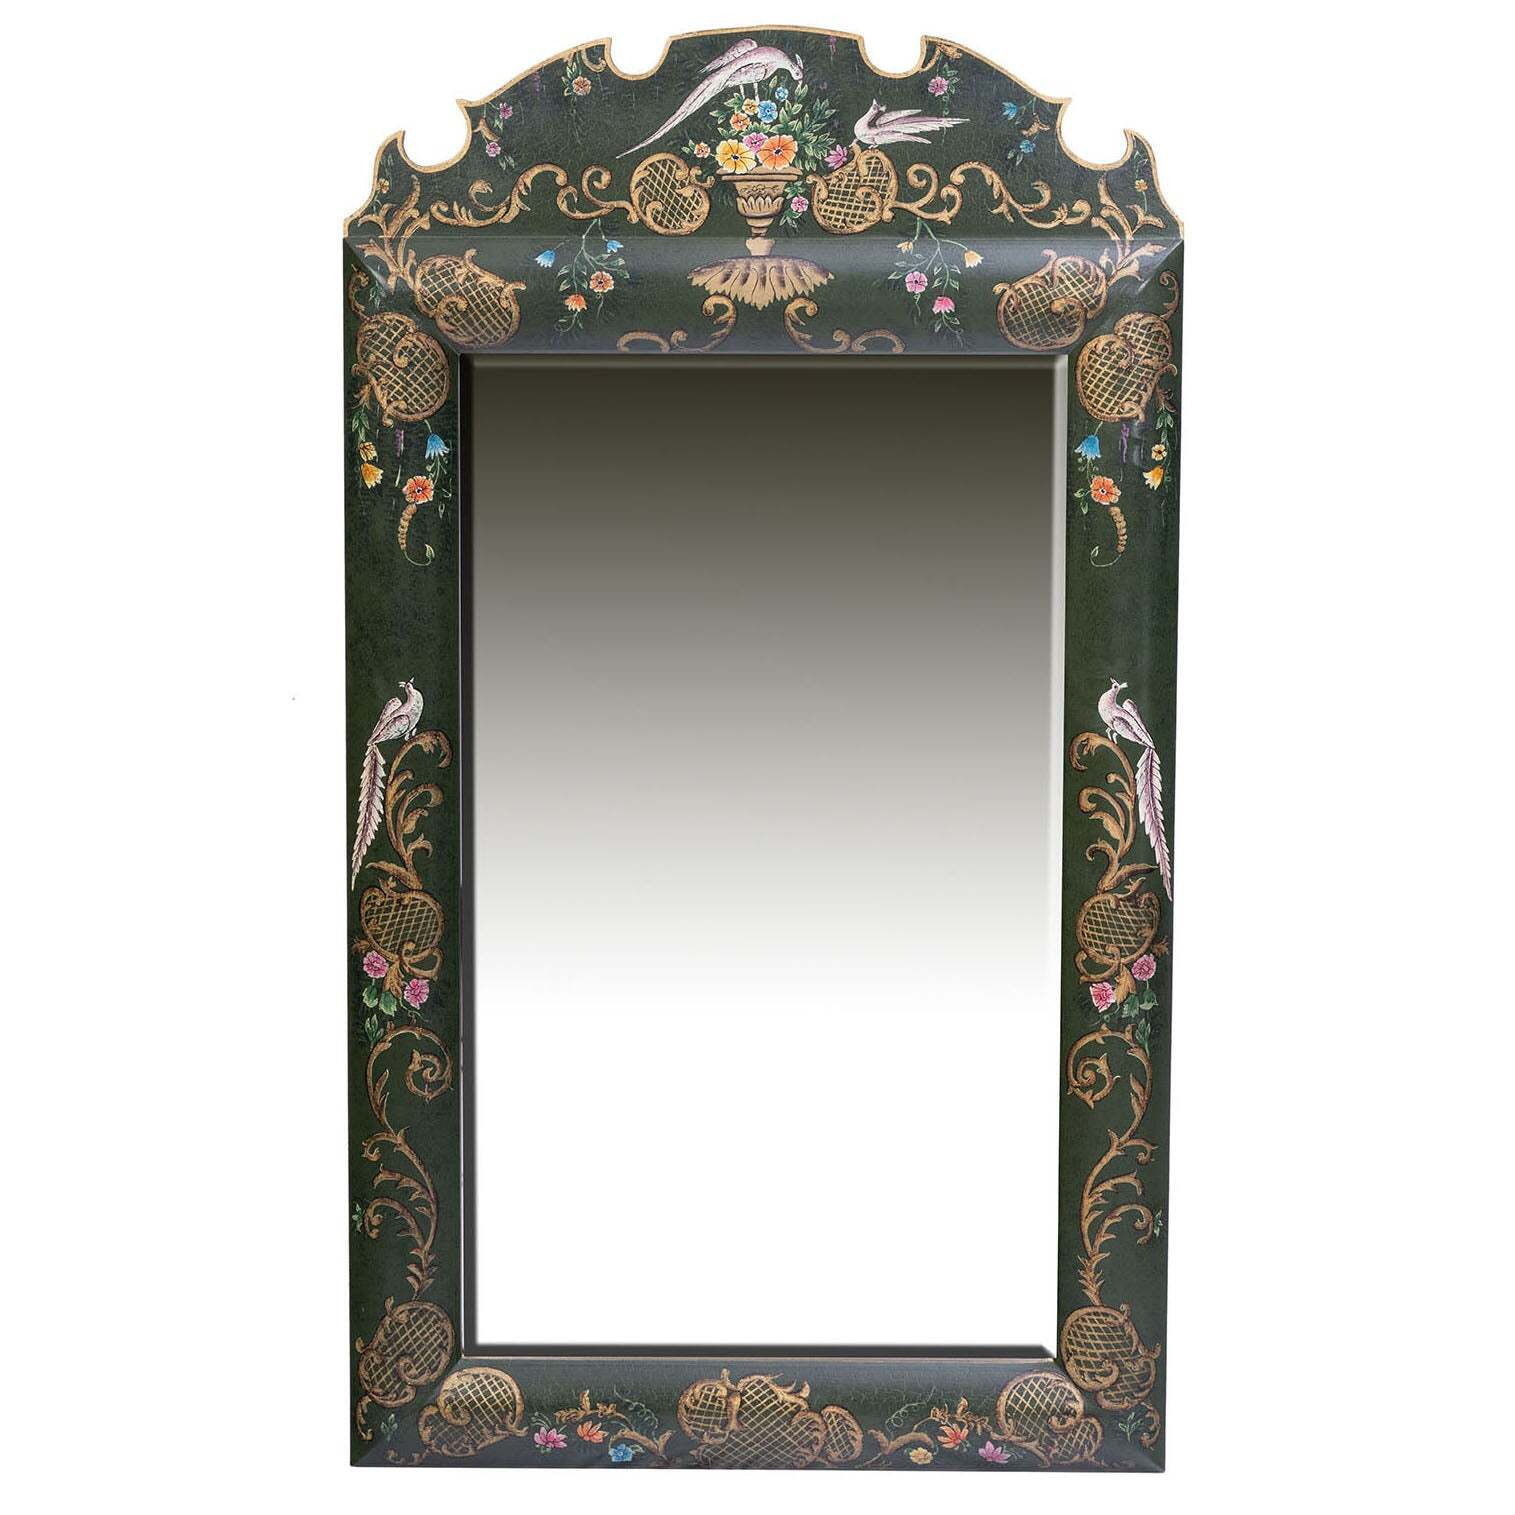 Green Fountain Design Dressing Table Mirror - image 1